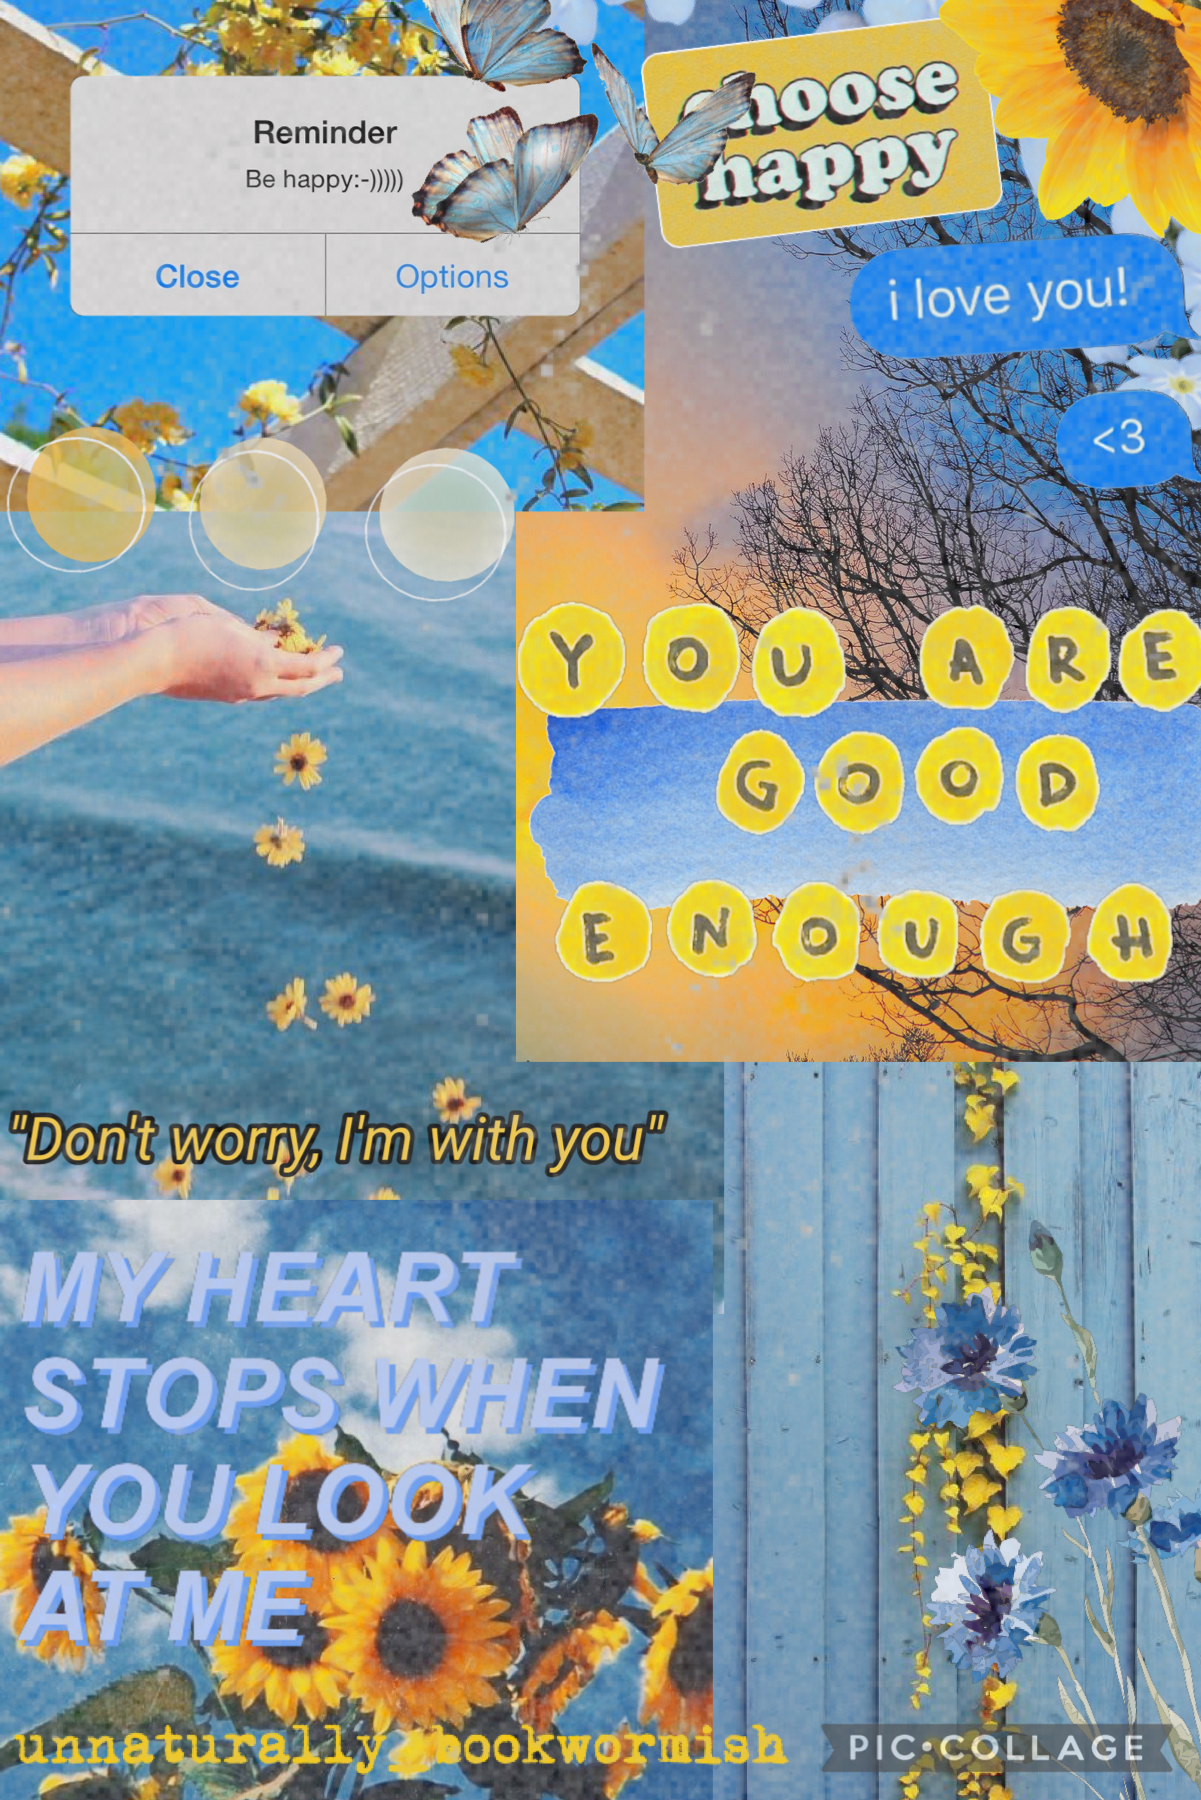 💛 9-12-21 💙
blue and yellow aesthetic because I’m still clinging to the last remnants of summer 😜 